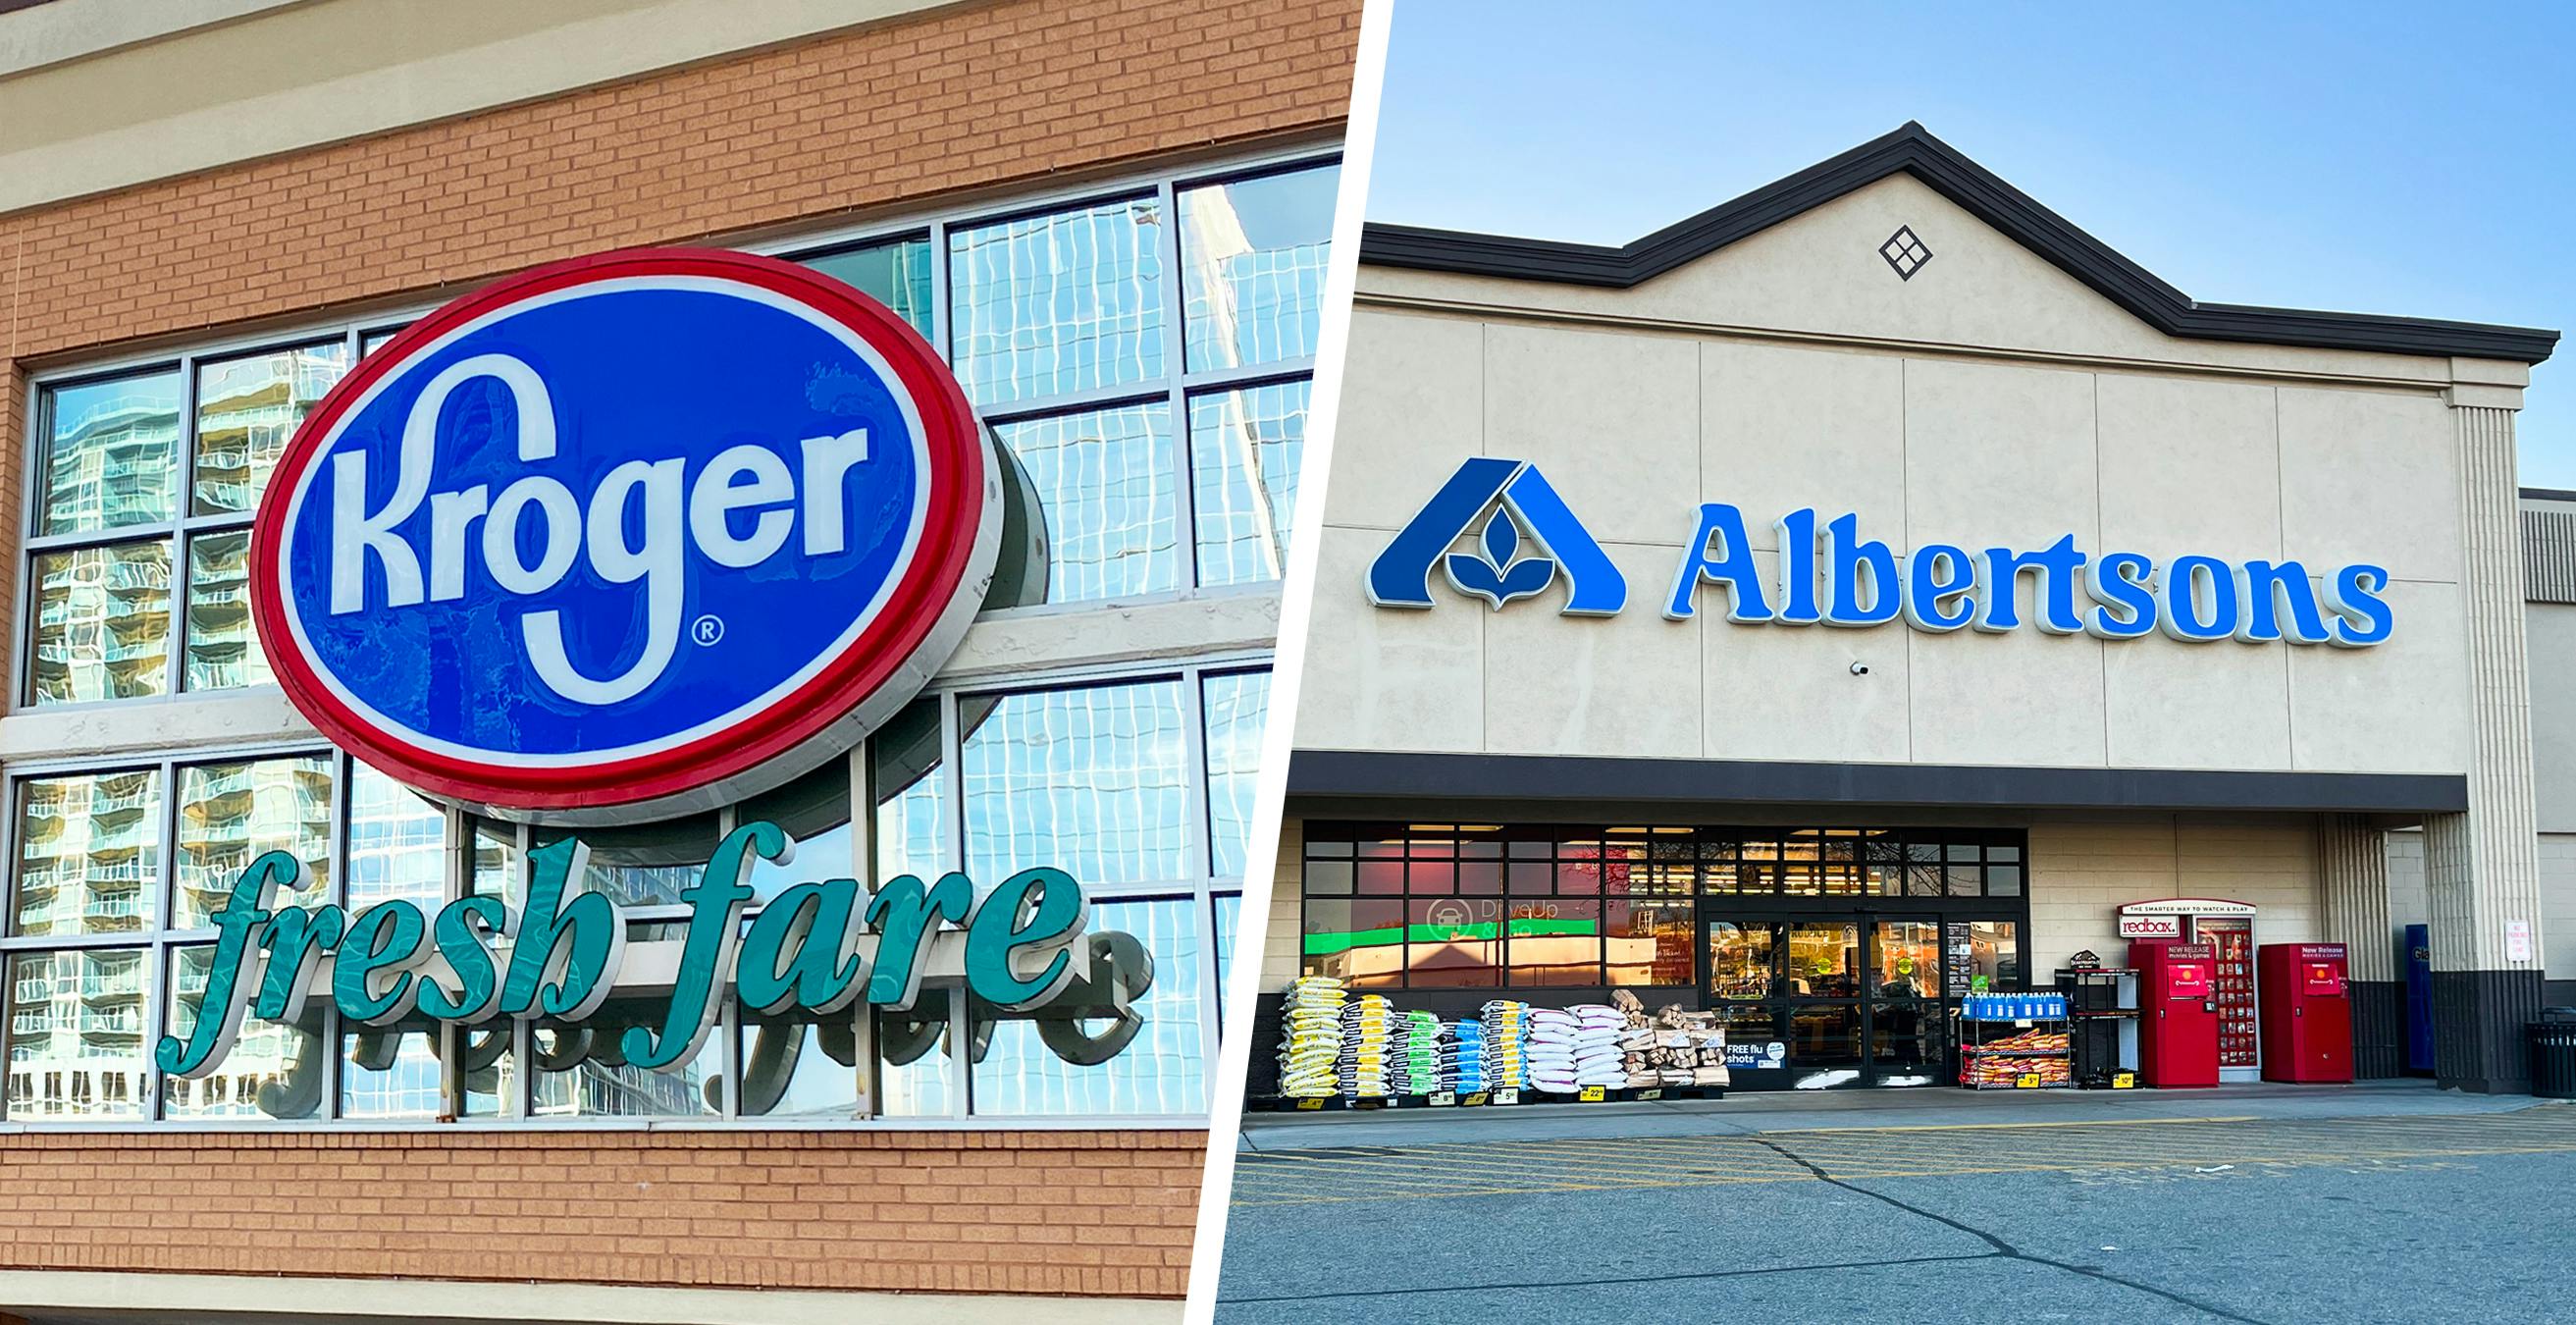 Kroger Buying Albertsons Featured 1676317428 1676317428 